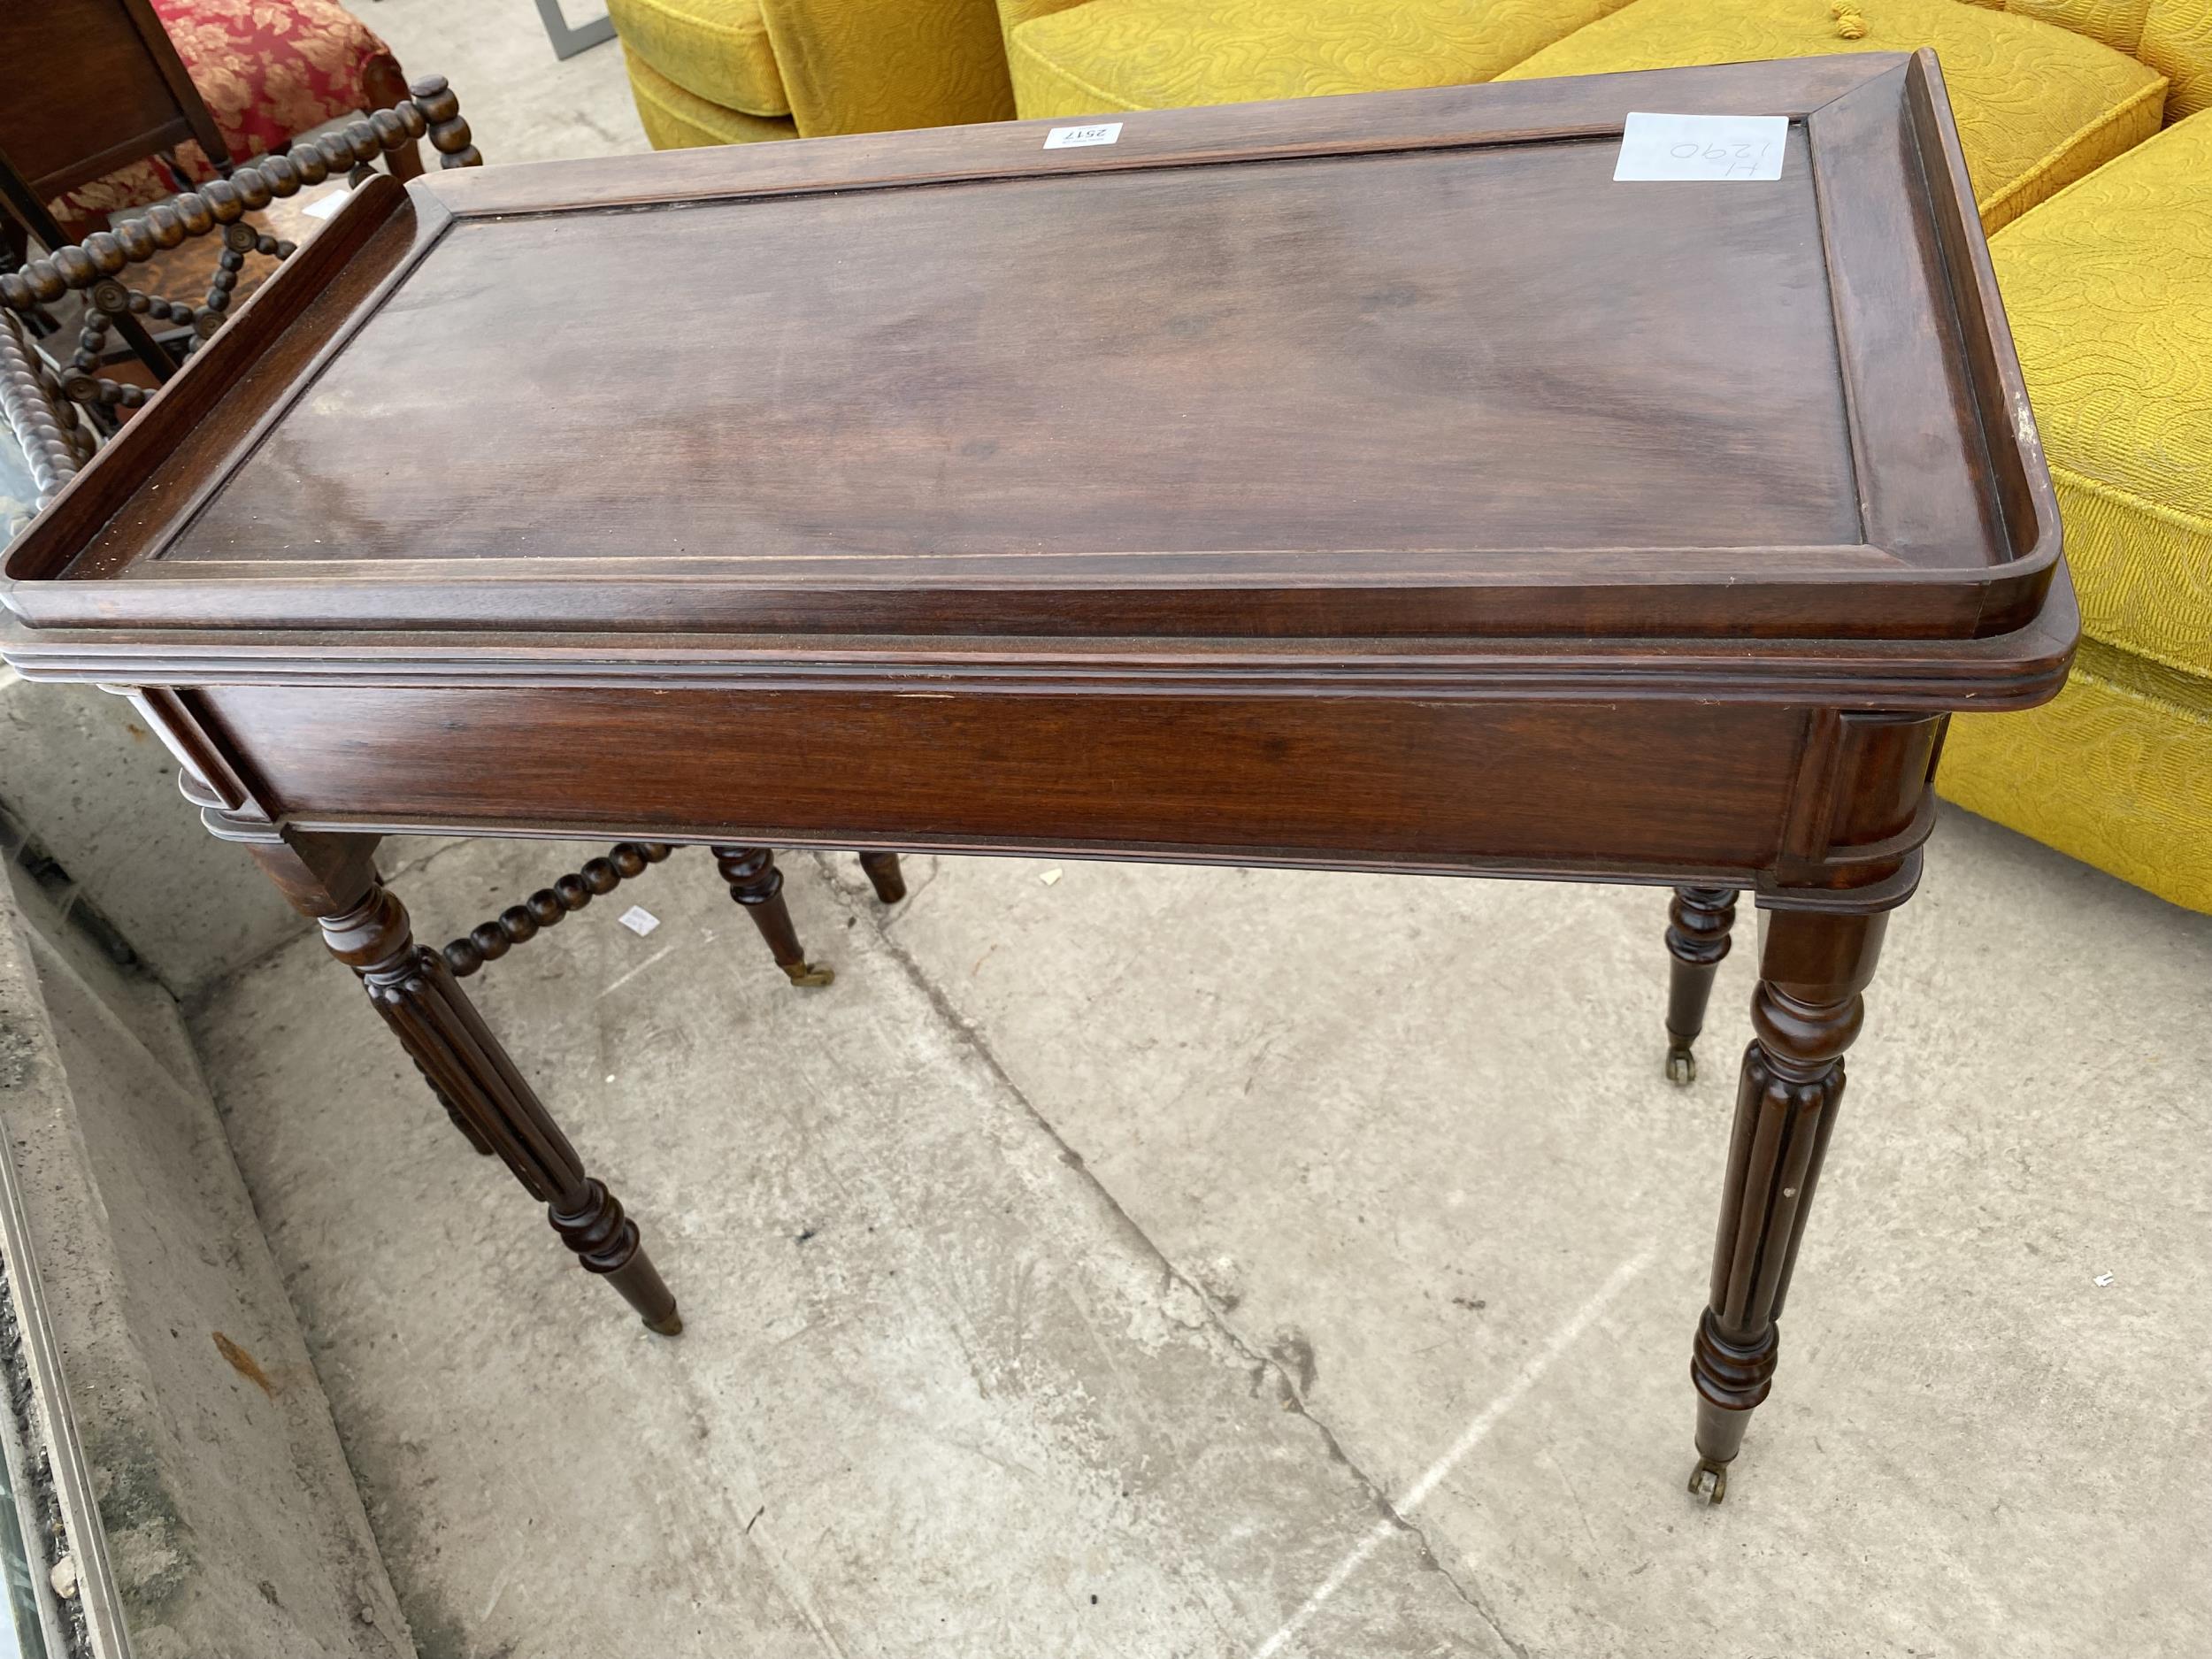 A REGENCY STYLE MAHOGANY SIDE-TABLE WITH GALLERY BACK, SINGLE DRAWER, ON TURNED AND FLUTED LEGS, 32" - Image 5 of 5